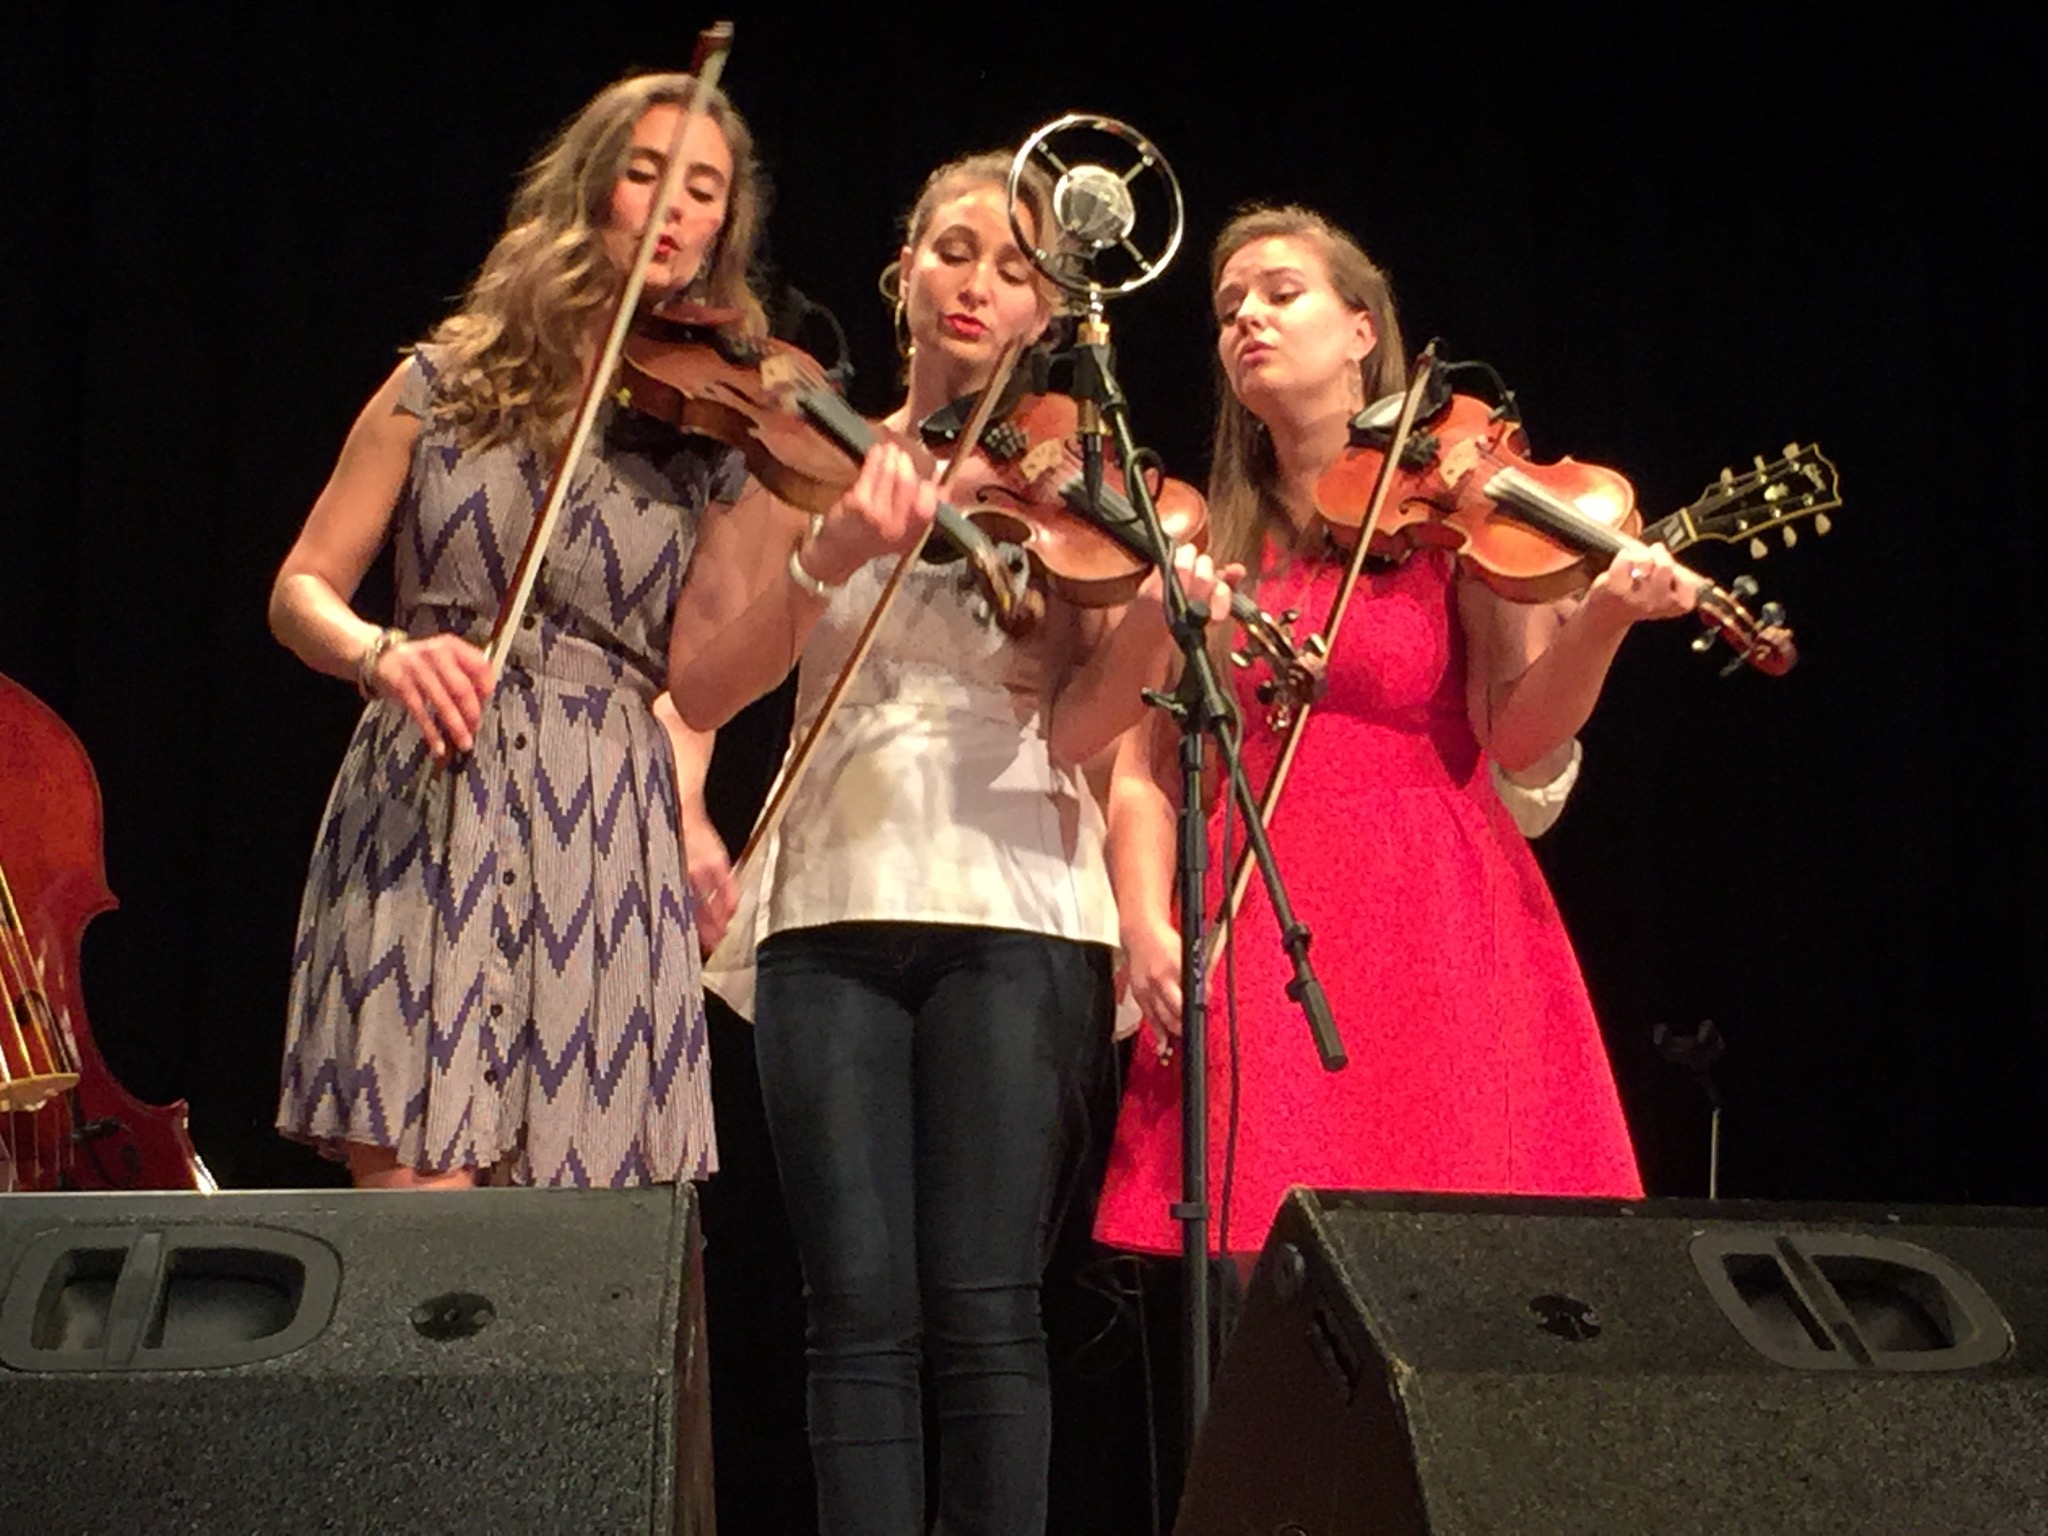 The Quebe Sisters&#039; triple fiddle attack thrilled the audience in Lebanon, KY. Photo taken by and the property of FourWalls.